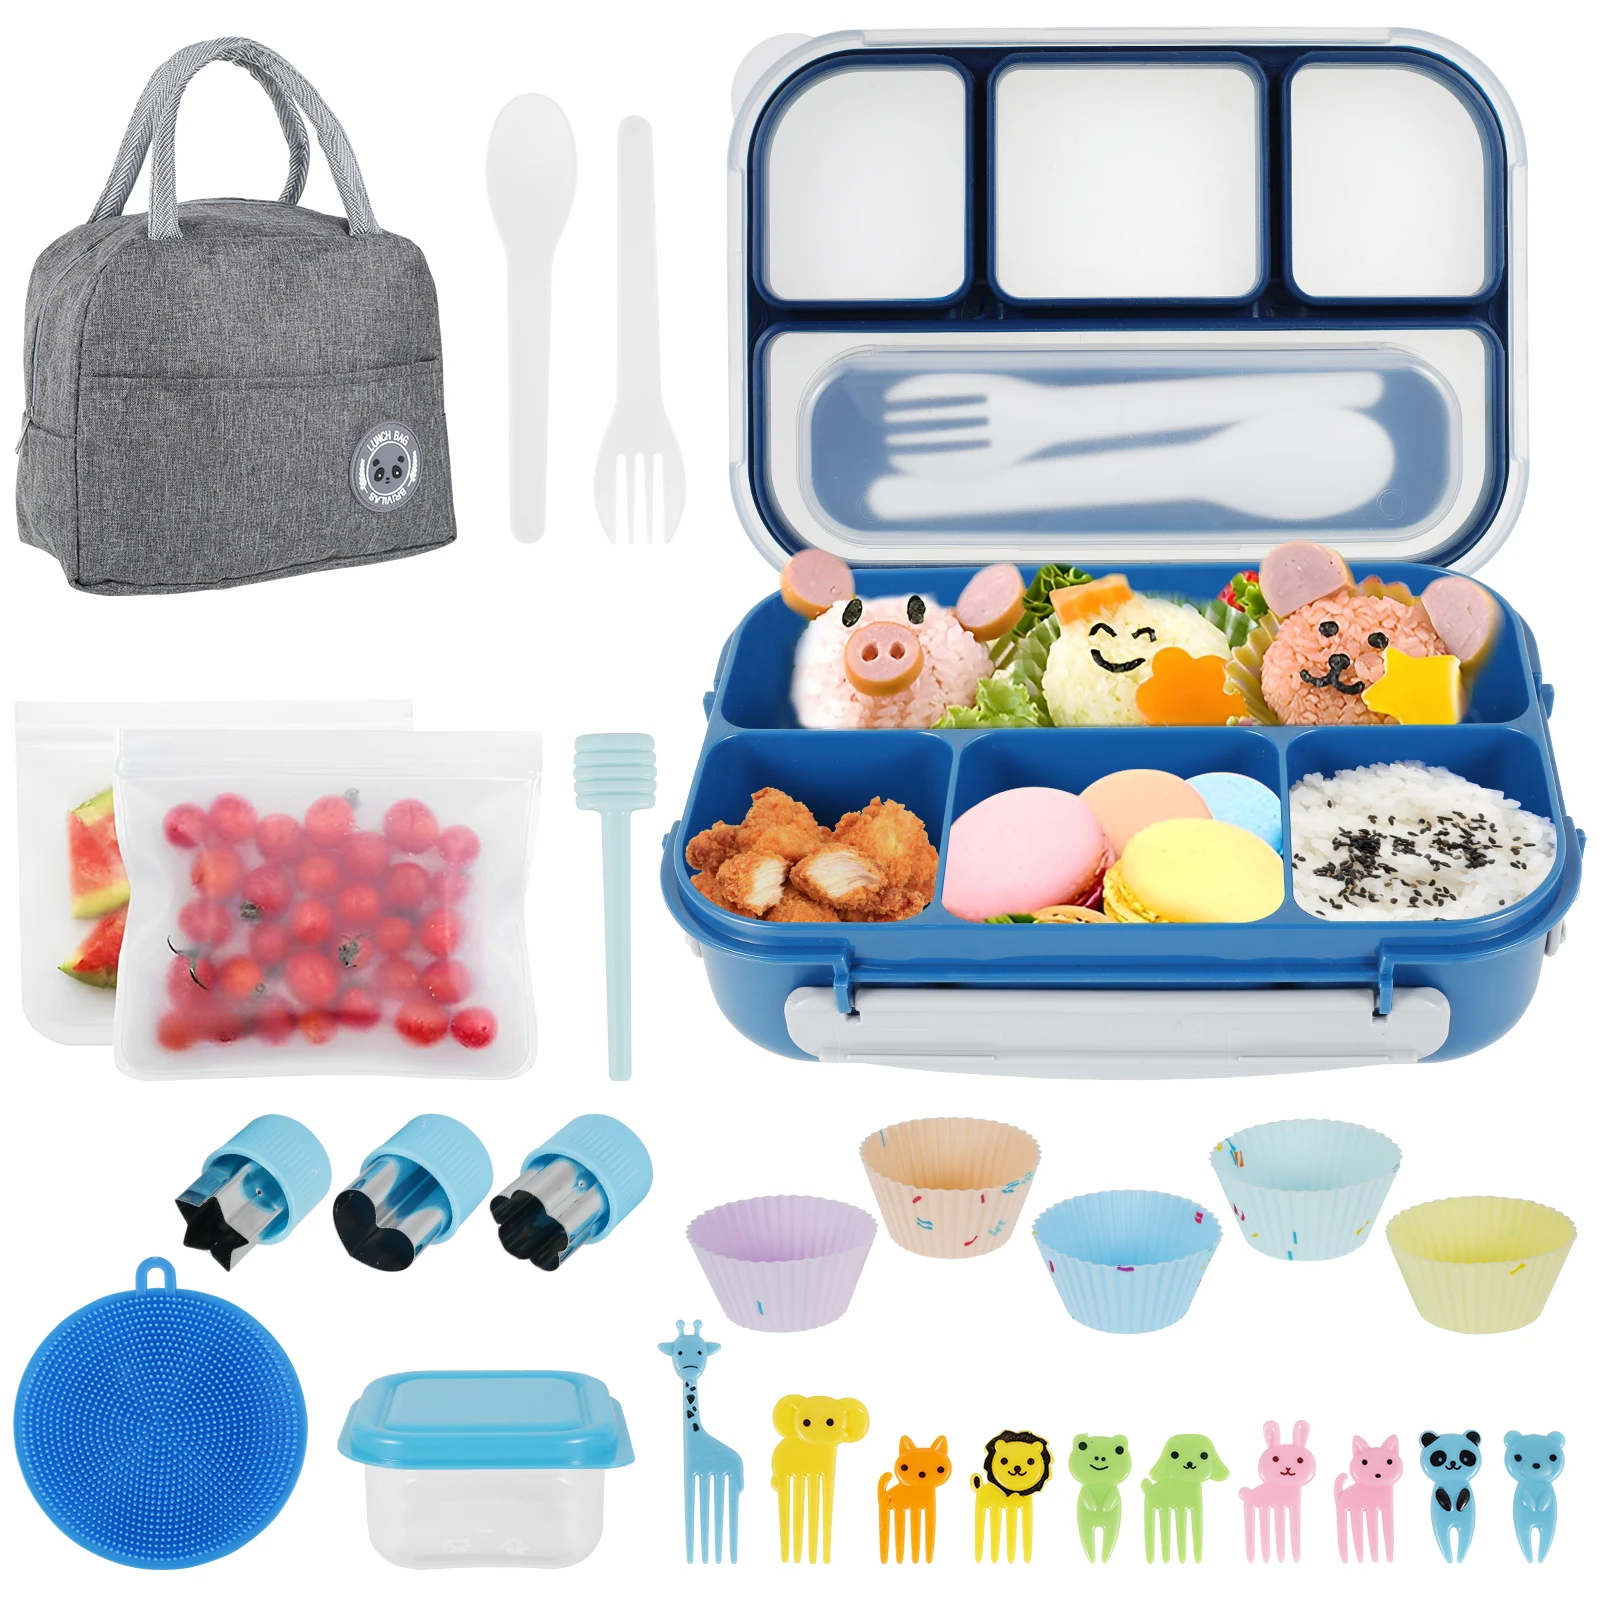 https://ae01.alicdn.com/kf/S393c512c599646319601ac3a0dc6513de/27Pcs-Bento-Box-Lunch-Box-Kit-Reusable-Bento-Lunch-Box-Set-1300ml-Food-Container-with-Compartments.jpg